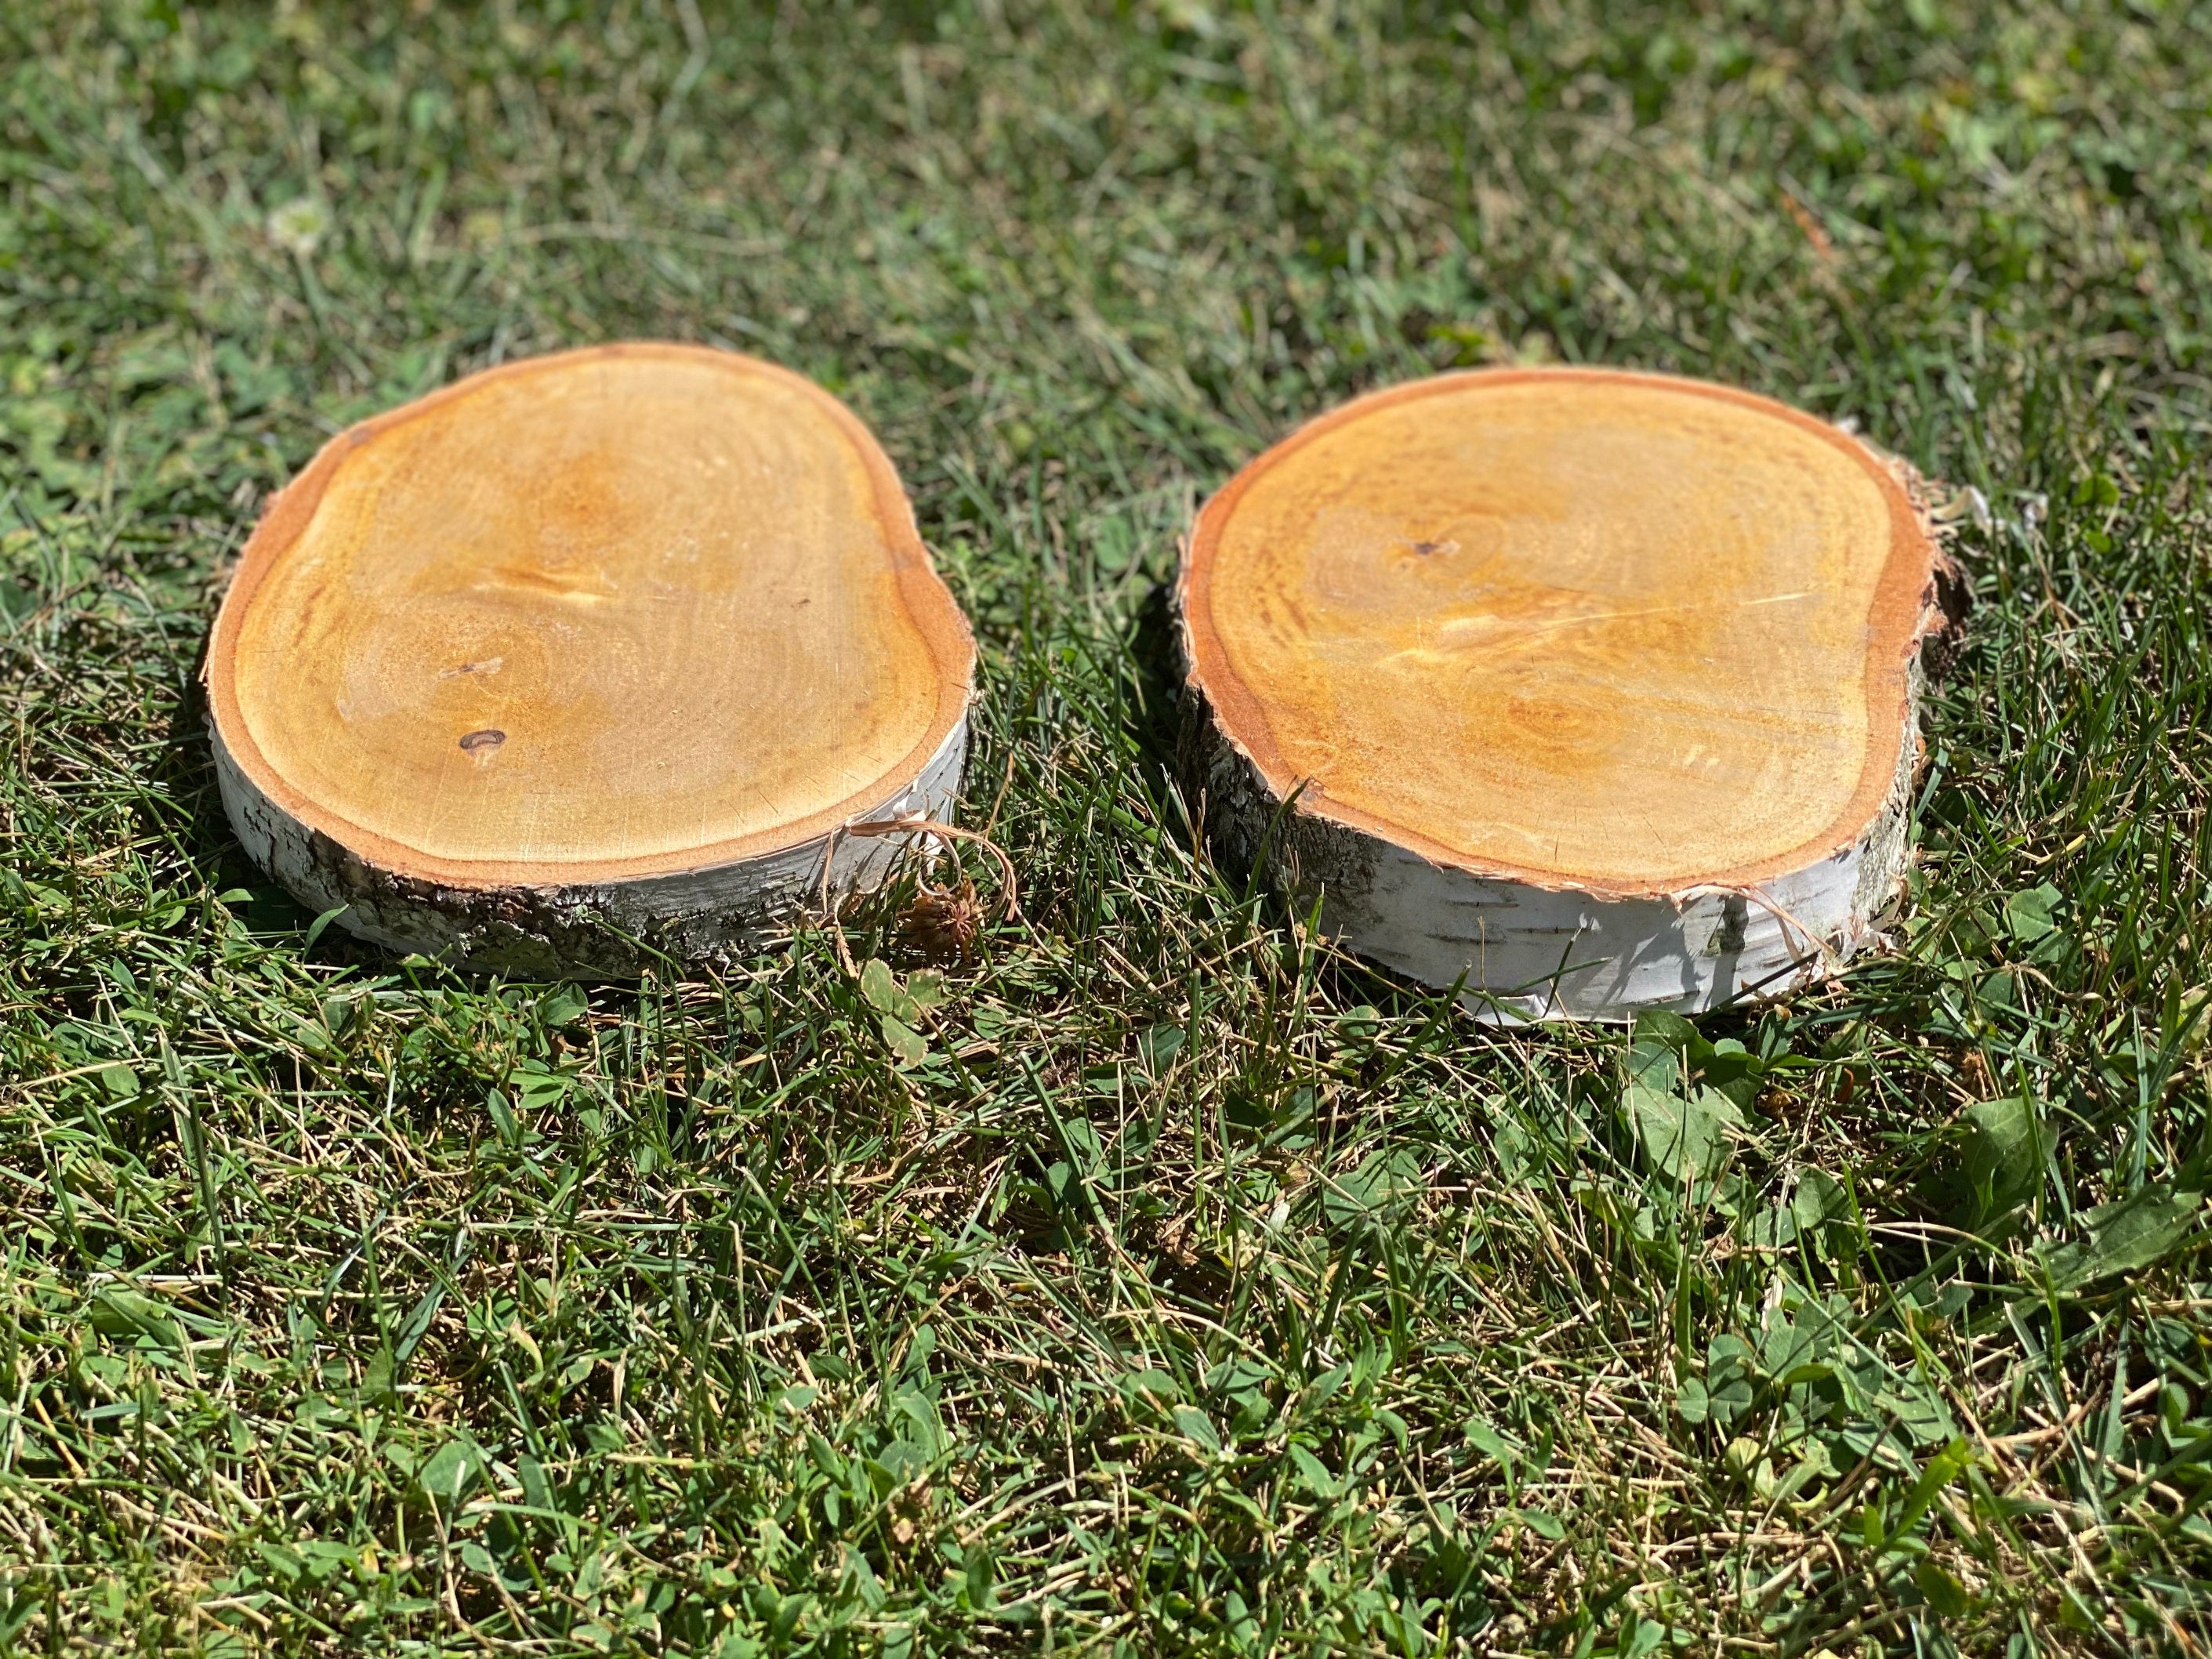 Two White Birch Discs, Approximately 6 Inches Long by 4-5 Inches Wide and 1 Inch Thick